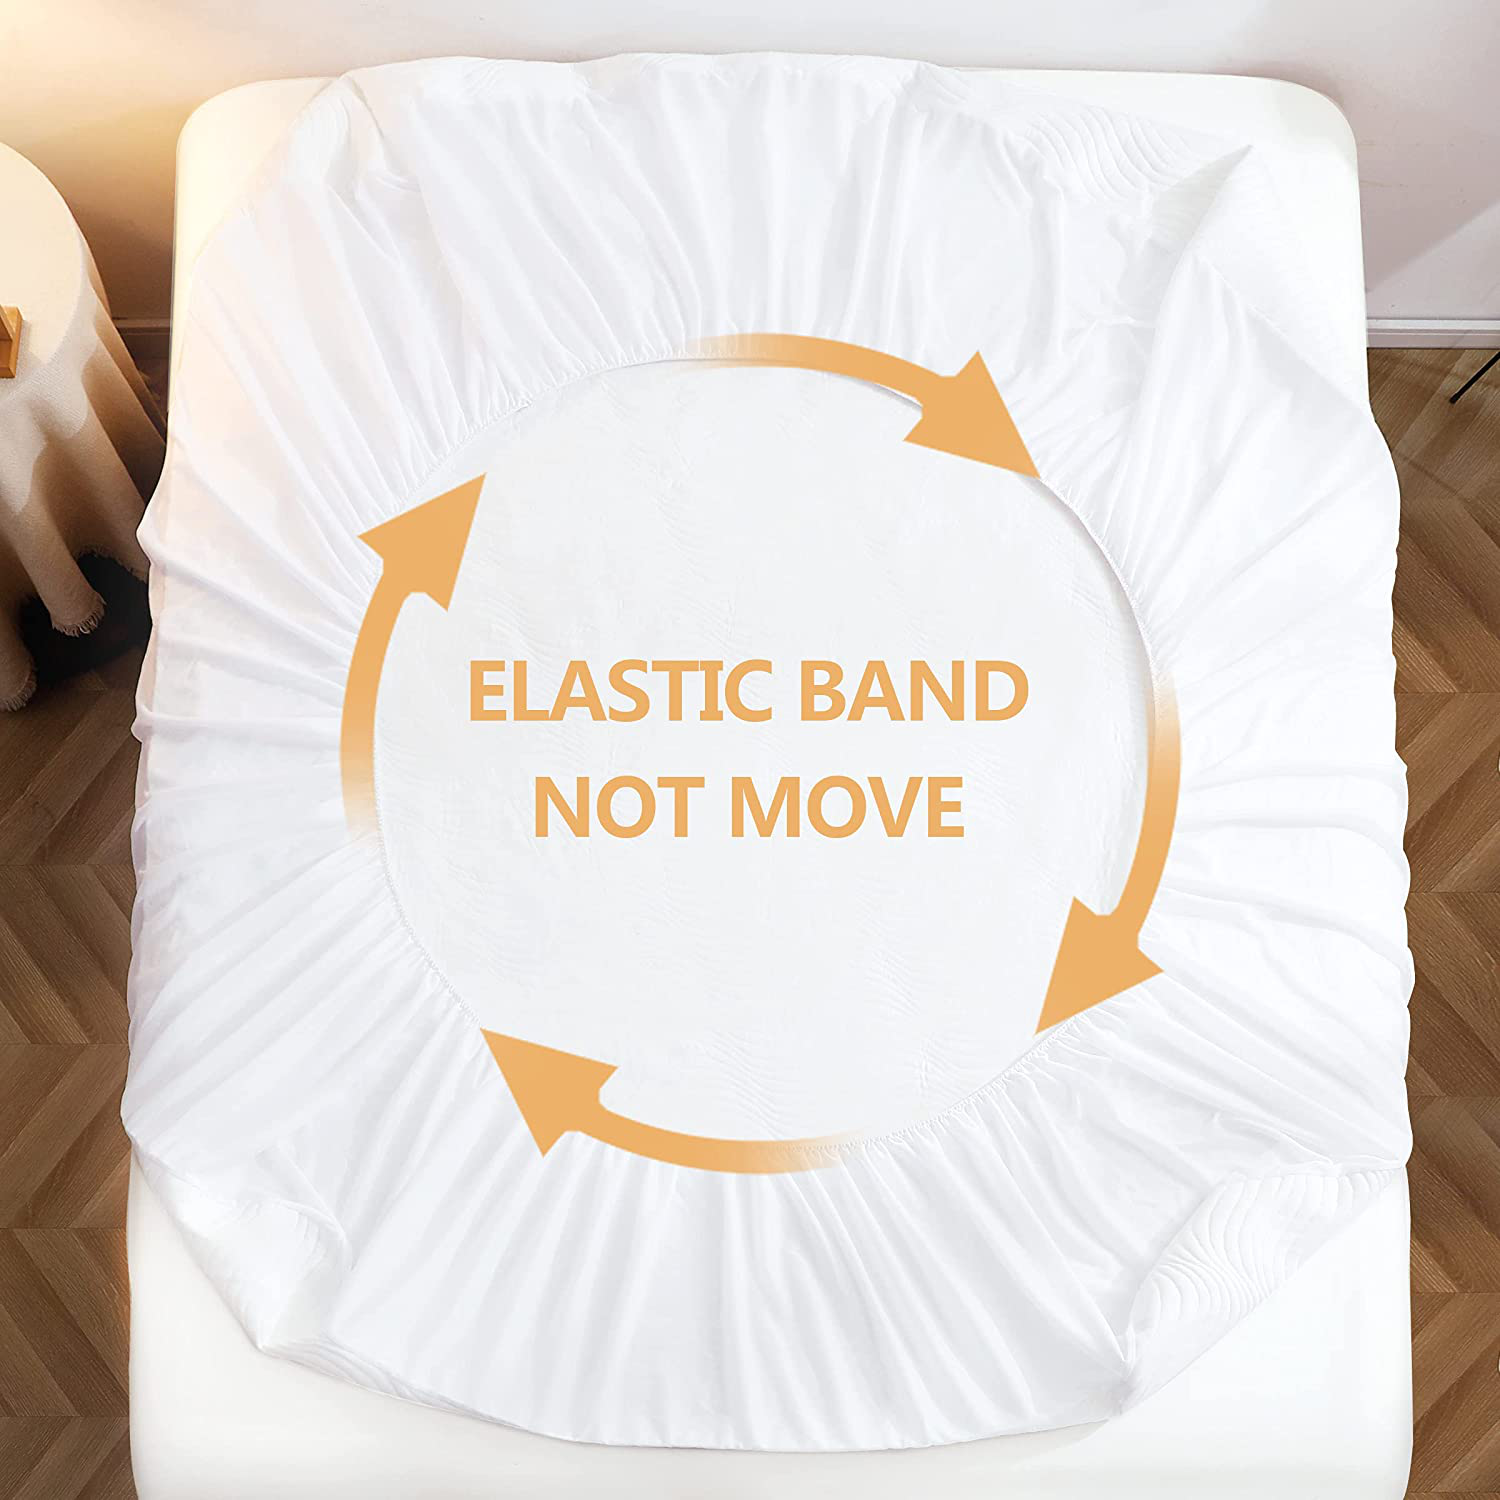 Jadeite star Twin Size Easy to Clean Mattress Pad Waterproof Mattress Protector, Deep Pocket Fitted 8-21 Inches Breathable Noiseless Soft Mattress Cover